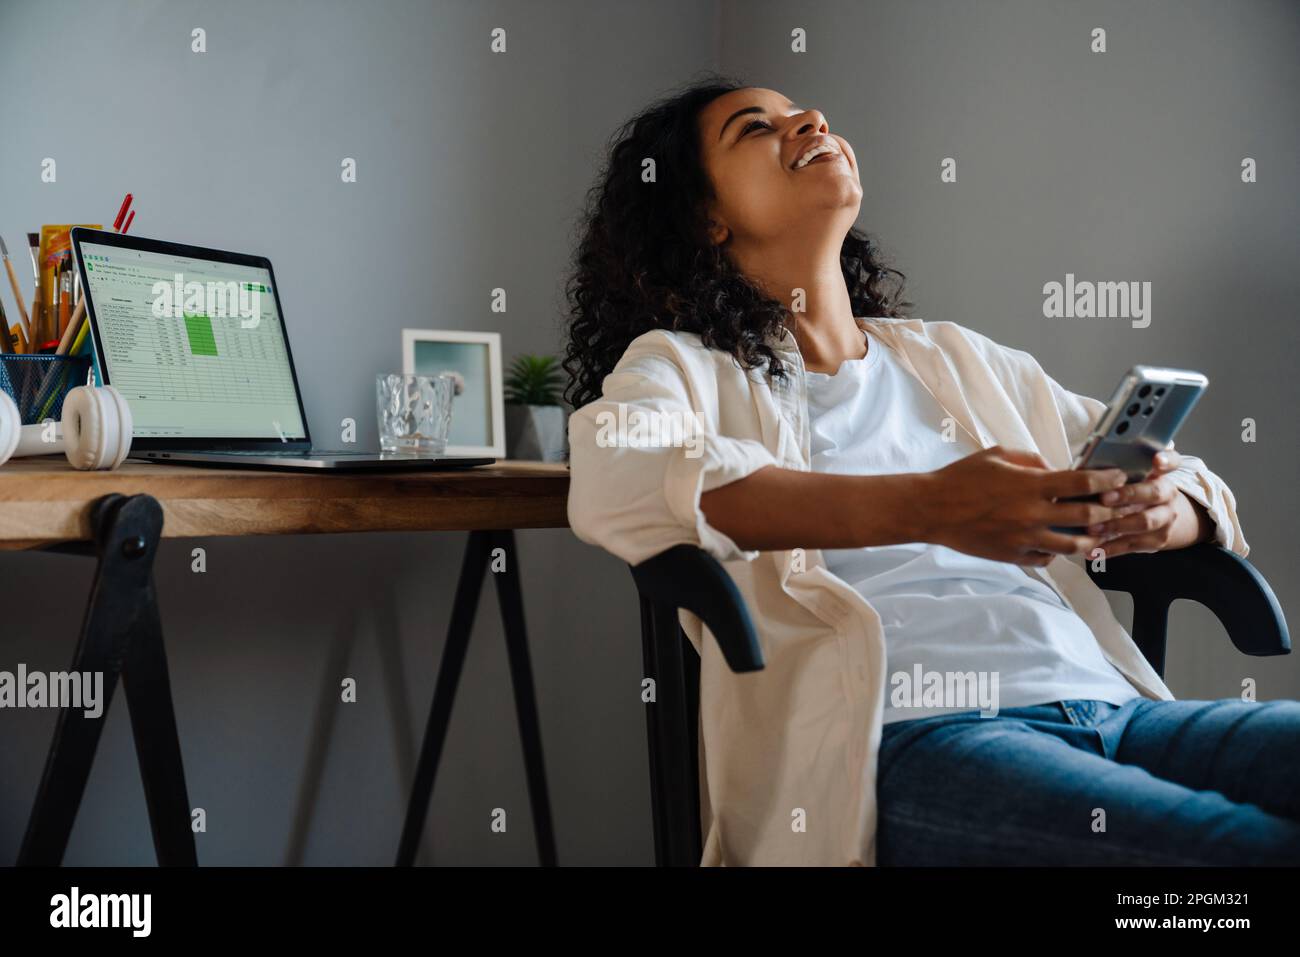 Black young woman smiling and using mobile phone while sitting on chair at home Stock Photo